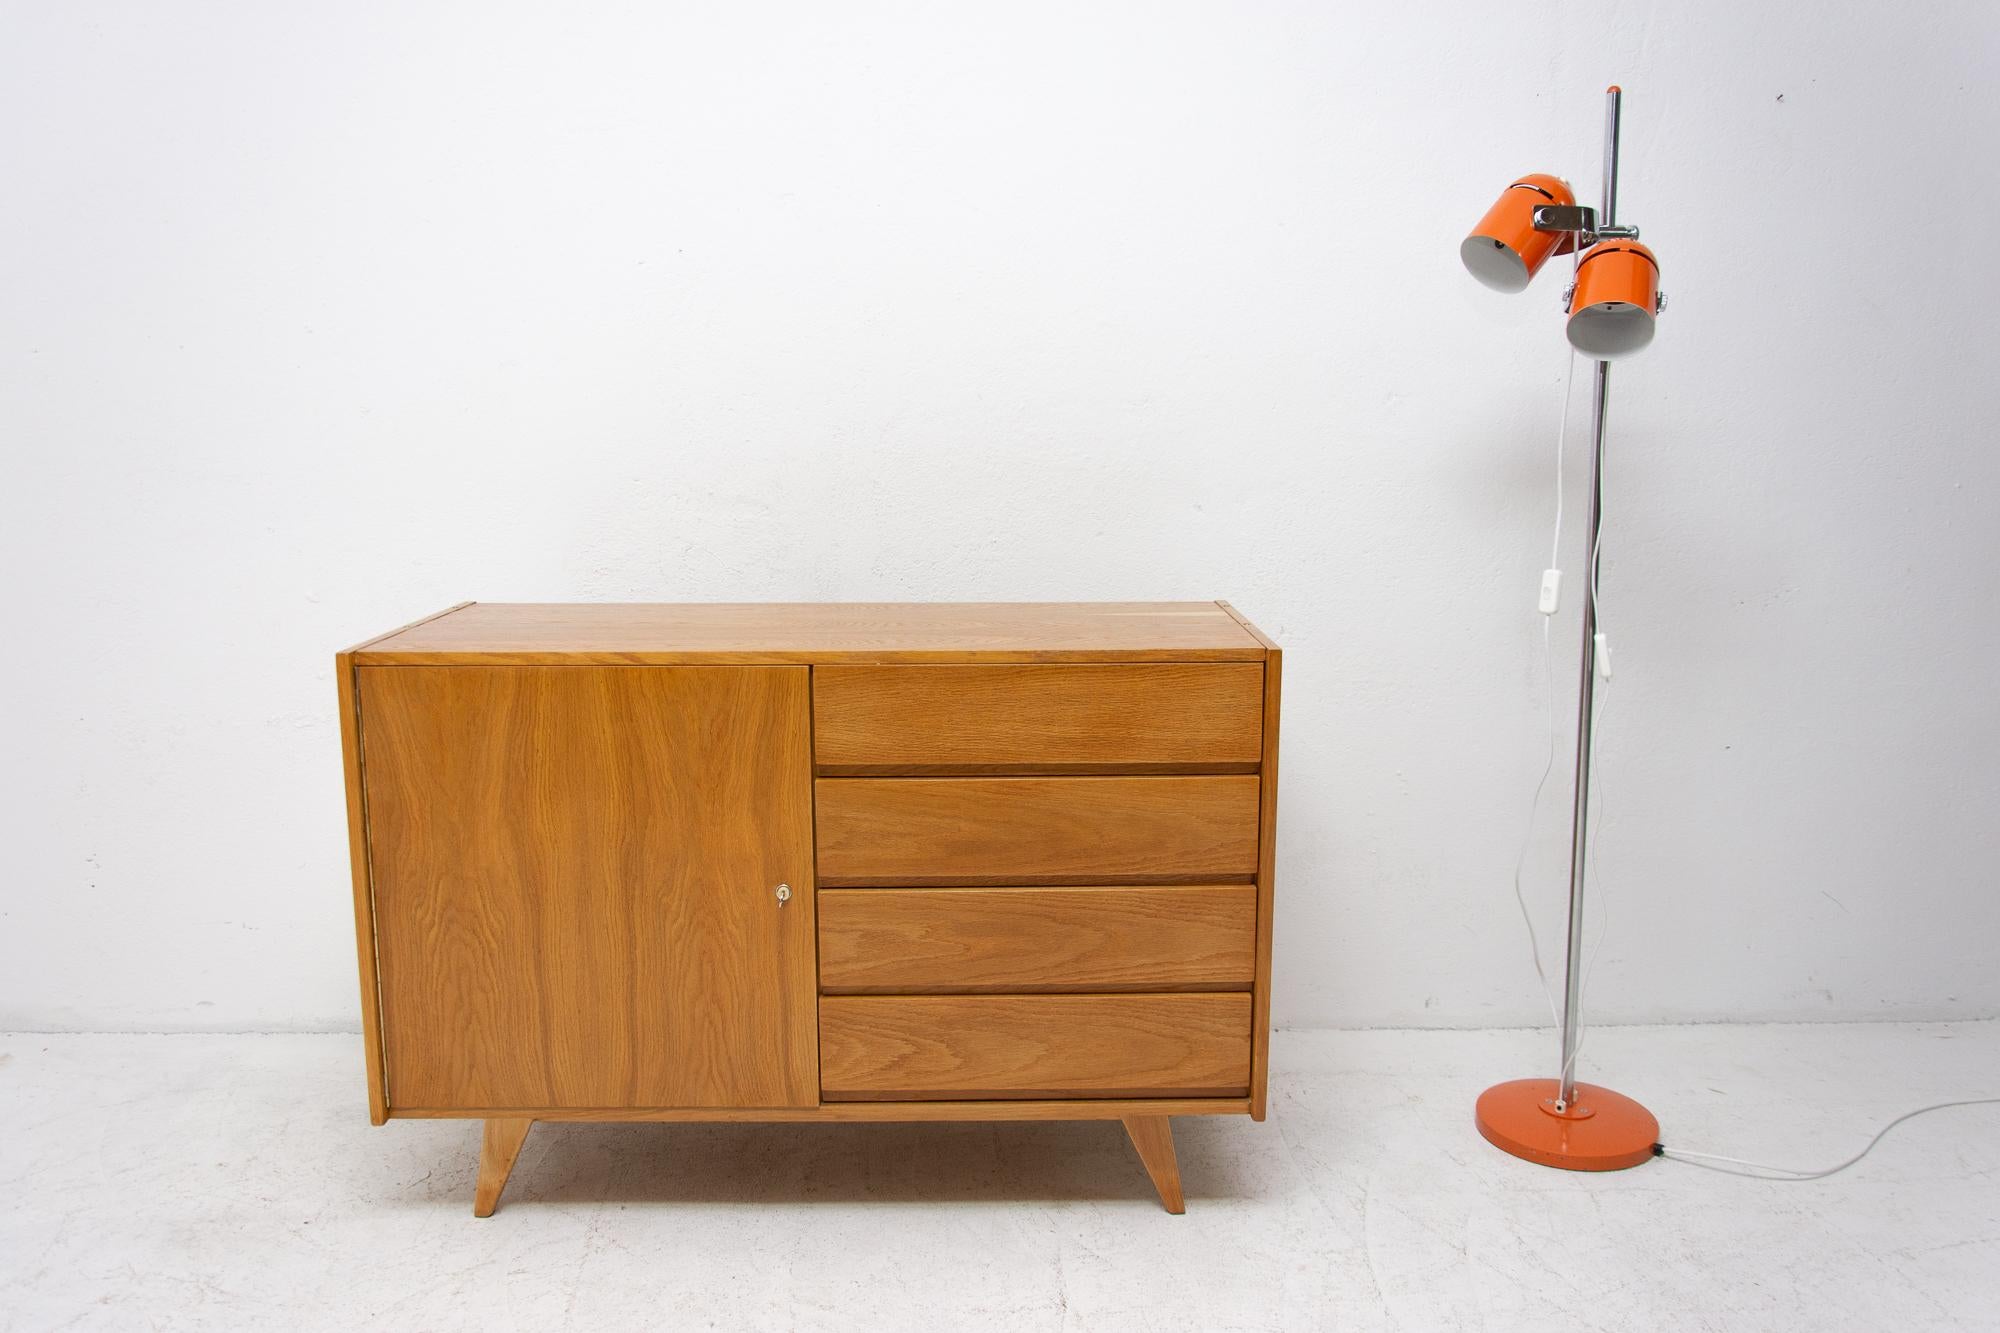 Midcentury chest of drawers, model no. U-458, designed by Jirí Jiroutek for Interiér Praha. It was made in the former Czechoslovakia in the 1960s. This model is associated with the world-famous EXPO 58 in Brussels. It´s made of oak wood and drawers